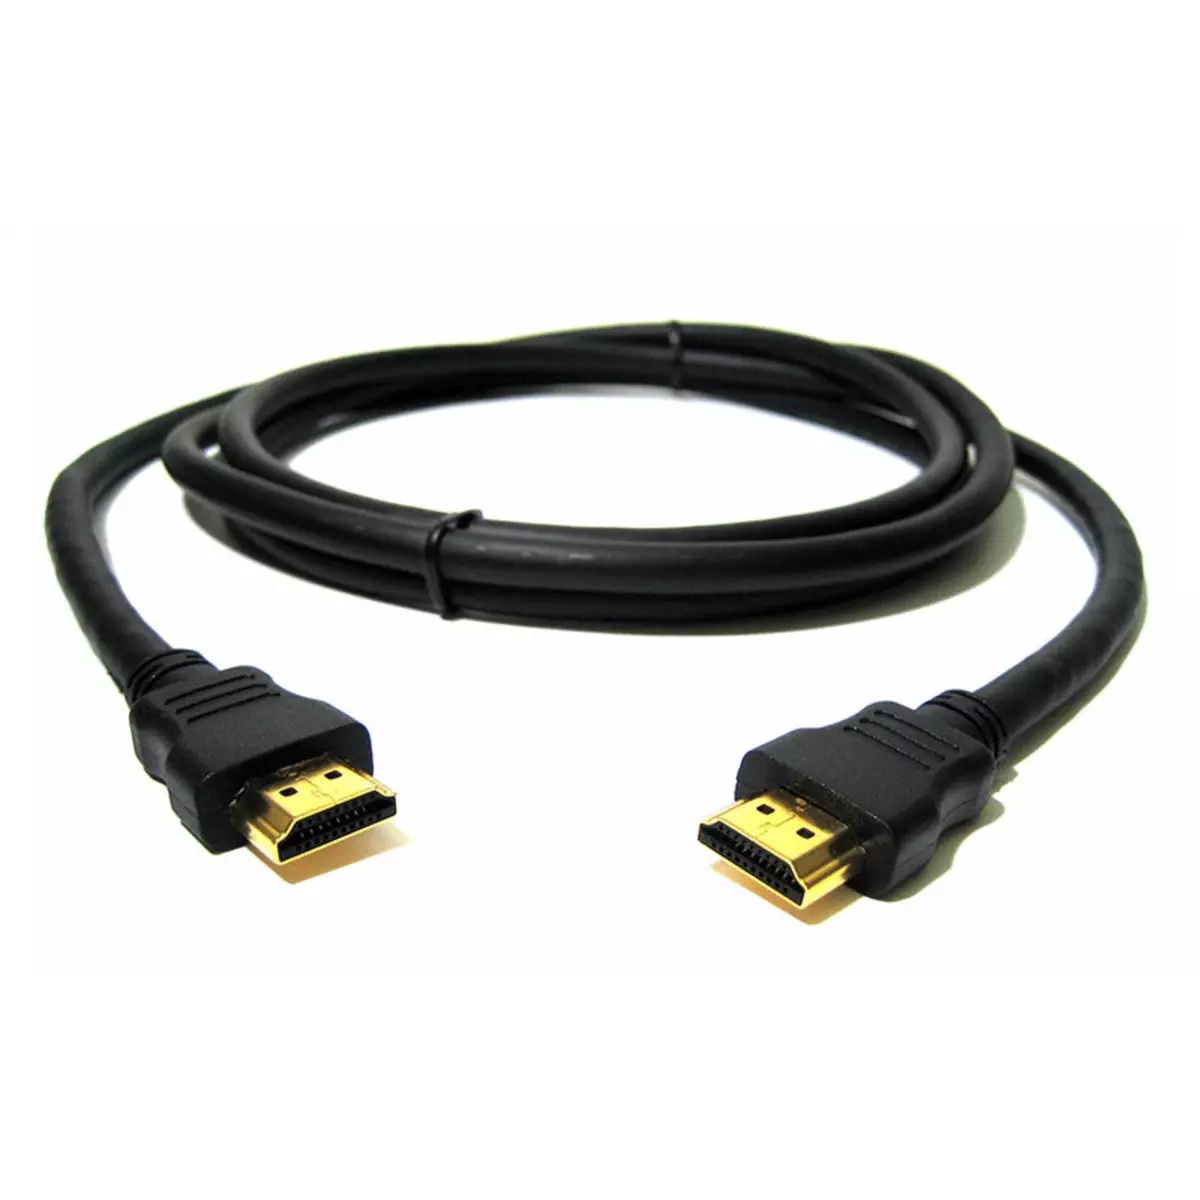 What are HDMI cables